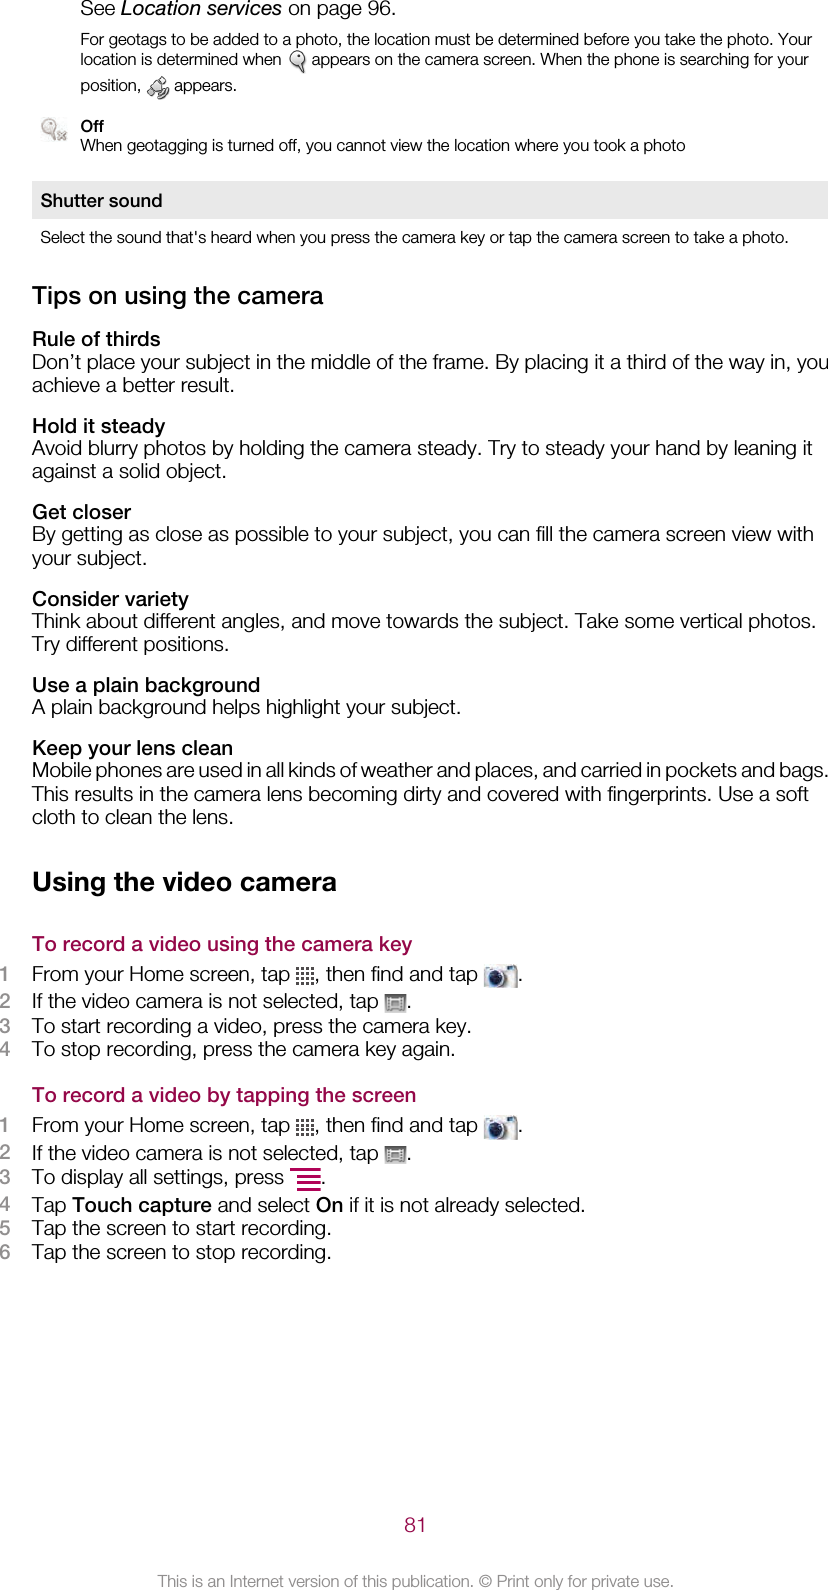 See Location services on page 96.For geotags to be added to a photo, the location must be determined before you take the photo. Yourlocation is determined when   appears on the camera screen. When the phone is searching for yourposition,   appears.OffWhen geotagging is turned off, you cannot view the location where you took a photoShutter soundSelect the sound that&apos;s heard when you press the camera key or tap the camera screen to take a photo.Tips on using the cameraRule of thirdsDon’t place your subject in the middle of the frame. By placing it a third of the way in, youachieve a better result.Hold it steadyAvoid blurry photos by holding the camera steady. Try to steady your hand by leaning itagainst a solid object.Get closerBy getting as close as possible to your subject, you can fill the camera screen view withyour subject.Consider varietyThink about different angles, and move towards the subject. Take some vertical photos.Try different positions.Use a plain backgroundA plain background helps highlight your subject.Keep your lens cleanMobile phones are used in all kinds of weather and places, and carried in pockets and bags.This results in the camera lens becoming dirty and covered with fingerprints. Use a softcloth to clean the lens.Using the video cameraTo record a video using the camera key1From your Home screen, tap  , then find and tap  .2If the video camera is not selected, tap  .3To start recording a video, press the camera key.4To stop recording, press the camera key again.To record a video by tapping the screen1From your Home screen, tap  , then find and tap  .2If the video camera is not selected, tap  .3To display all settings, press  .4Tap Touch capture and select On if it is not already selected.5Tap the screen to start recording.6Tap the screen to stop recording.81This is an Internet version of this publication. © Print only for private use.